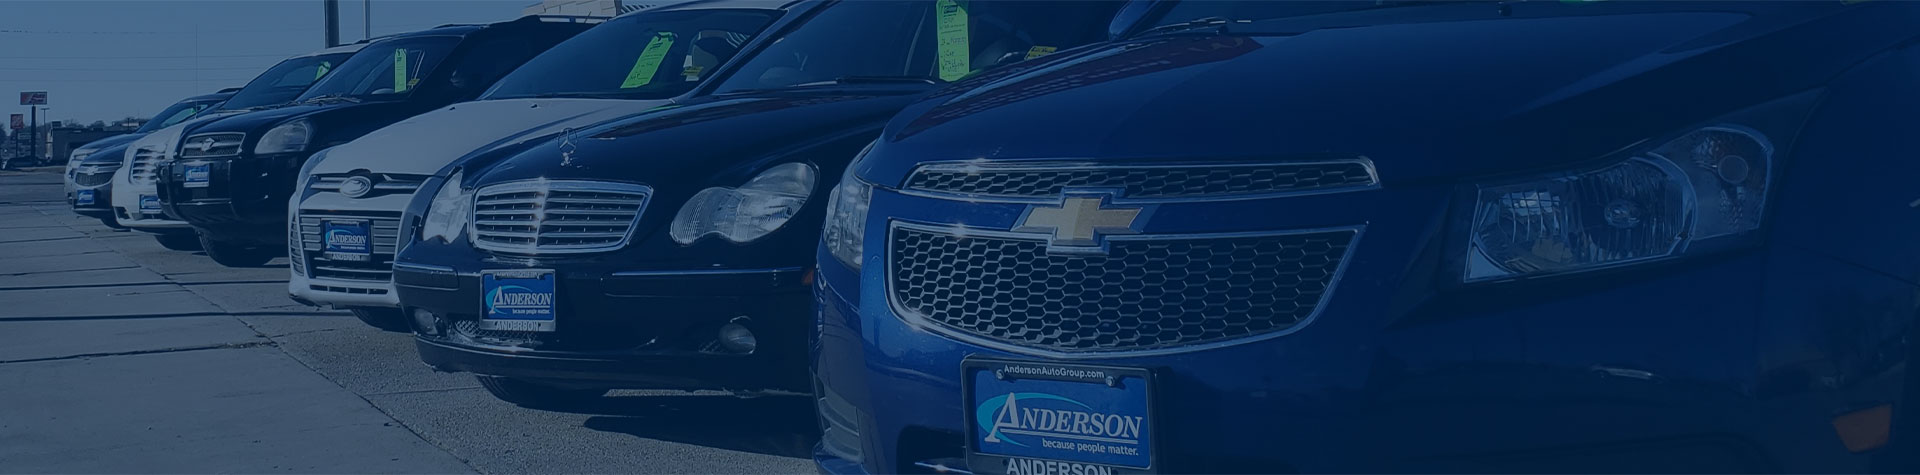 Anderson Auto Group Credit Connection